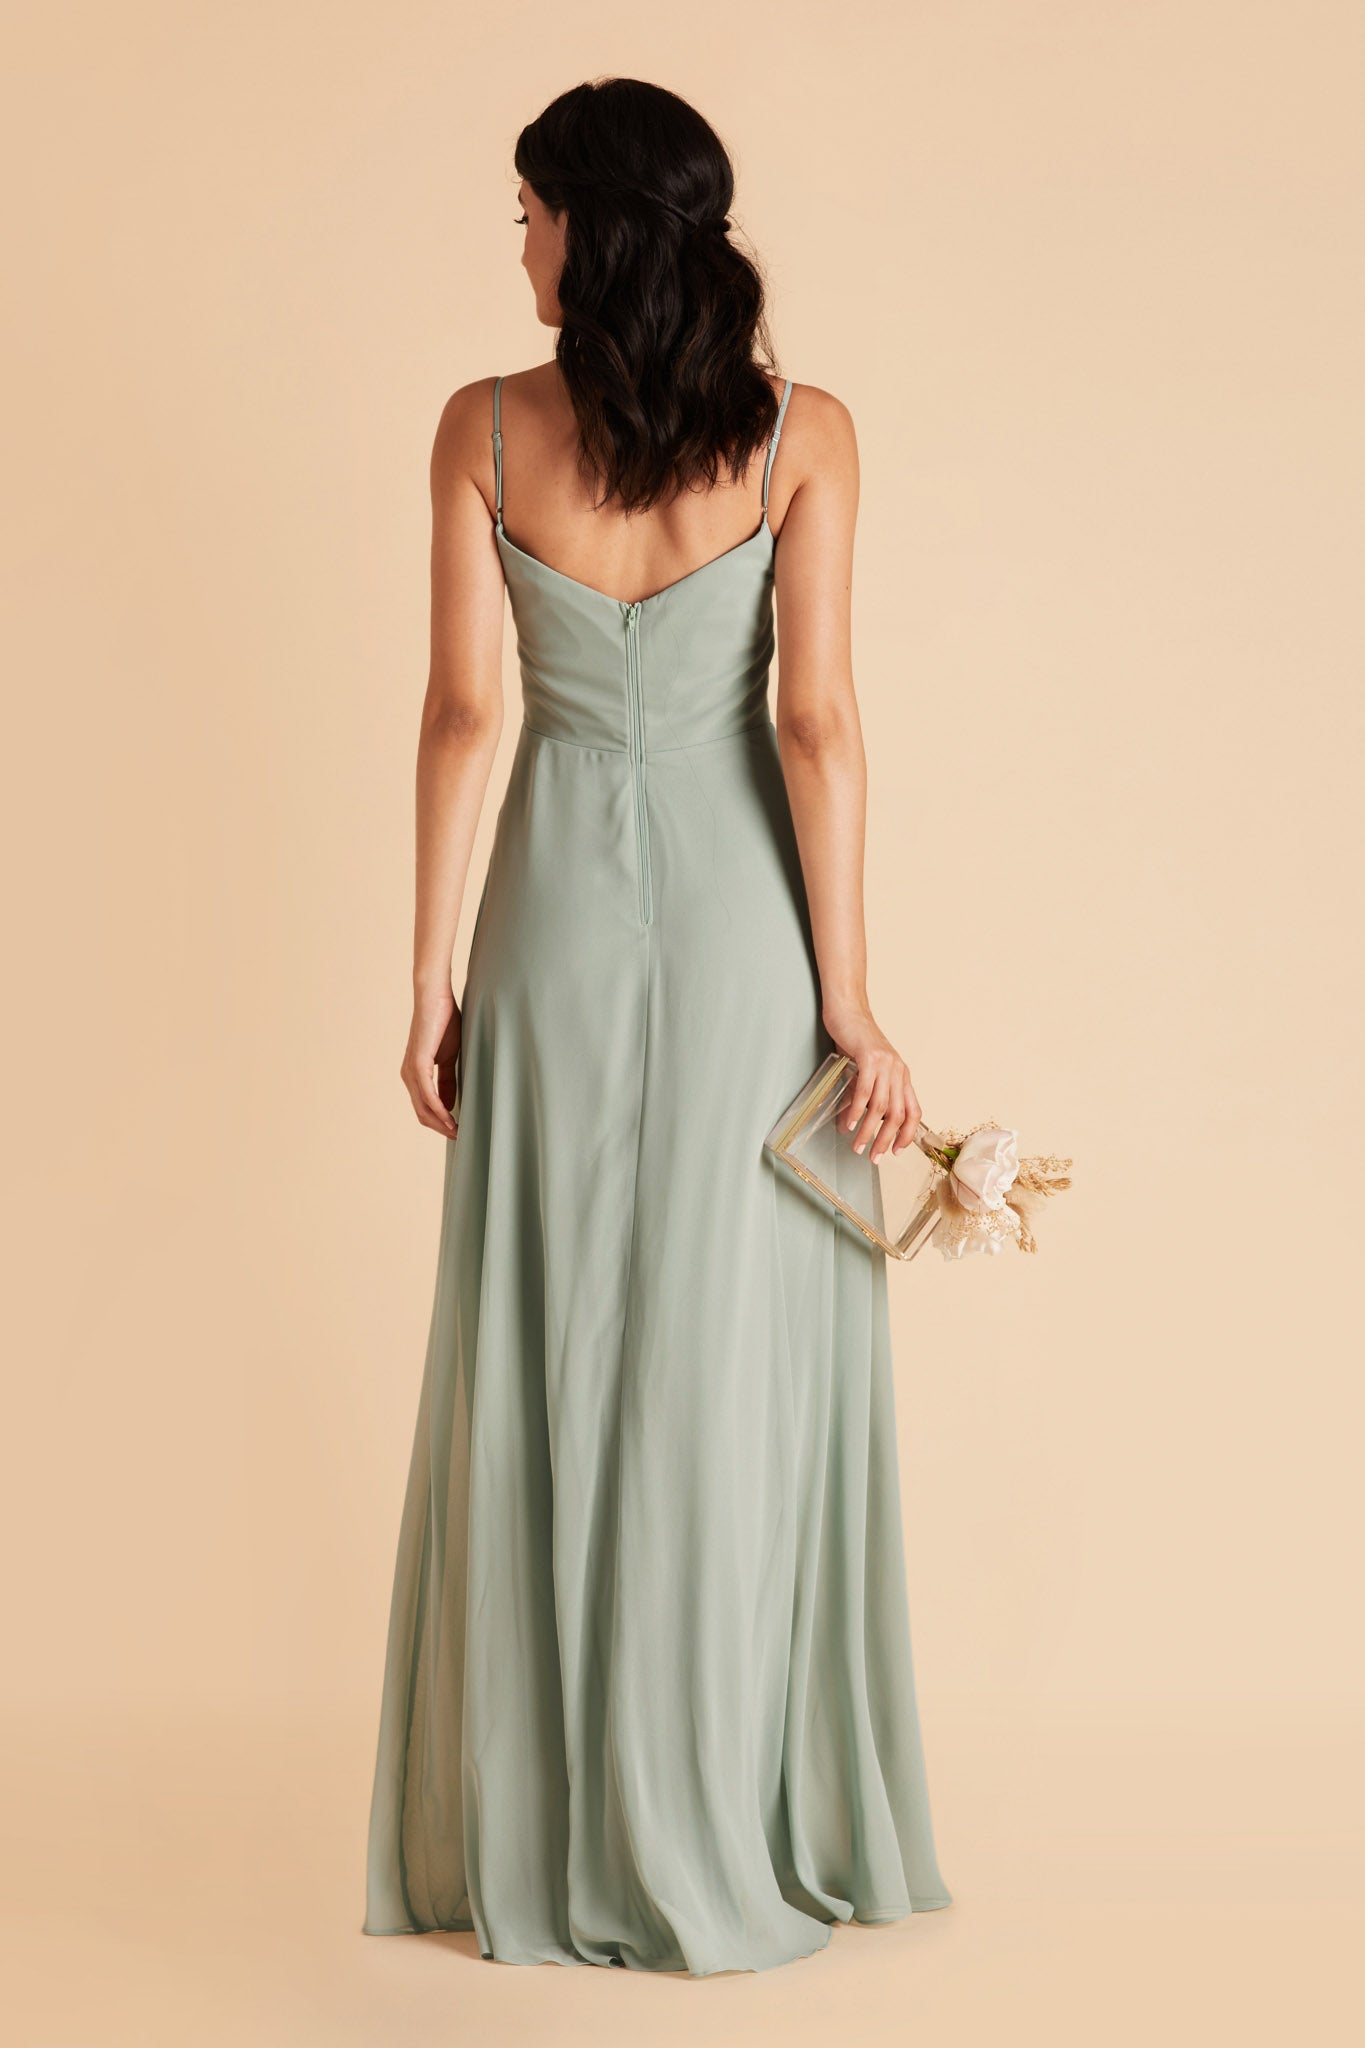 Back view of the floor-length Devin Convertible Bridesmaid Dress in sage chiffon displays adjustable spaghetti straps and an open back with a slight v-cut just below the shoulder blades.